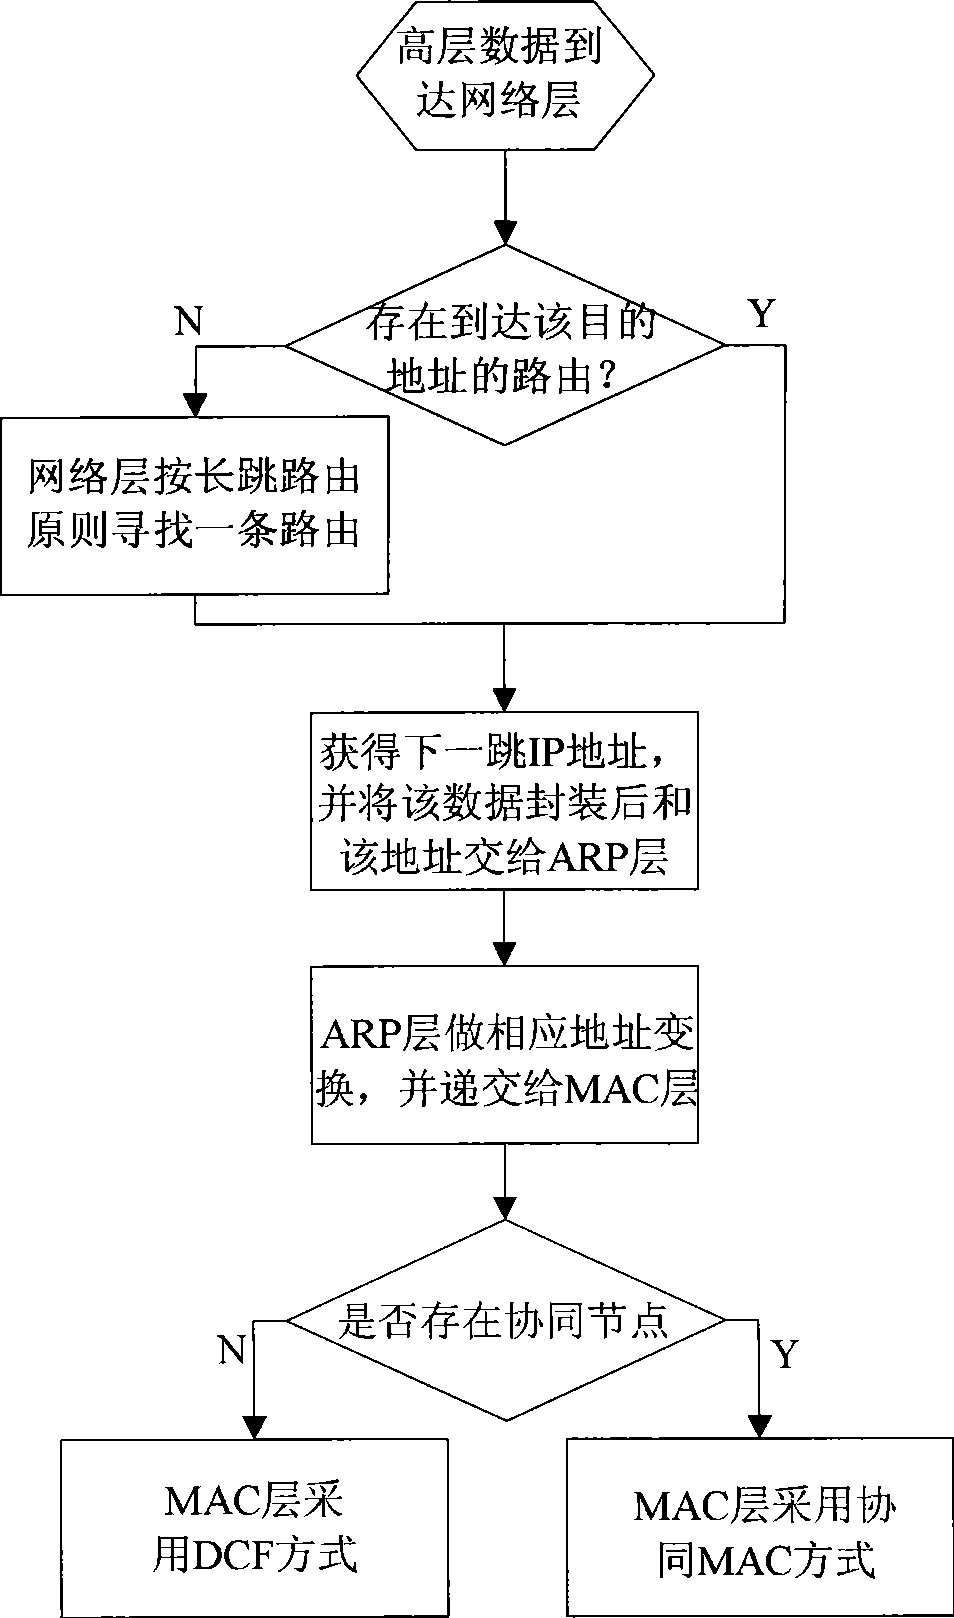 Cross-layer cooperated routing method supporting multi-speed transmission in Ad Hoc network